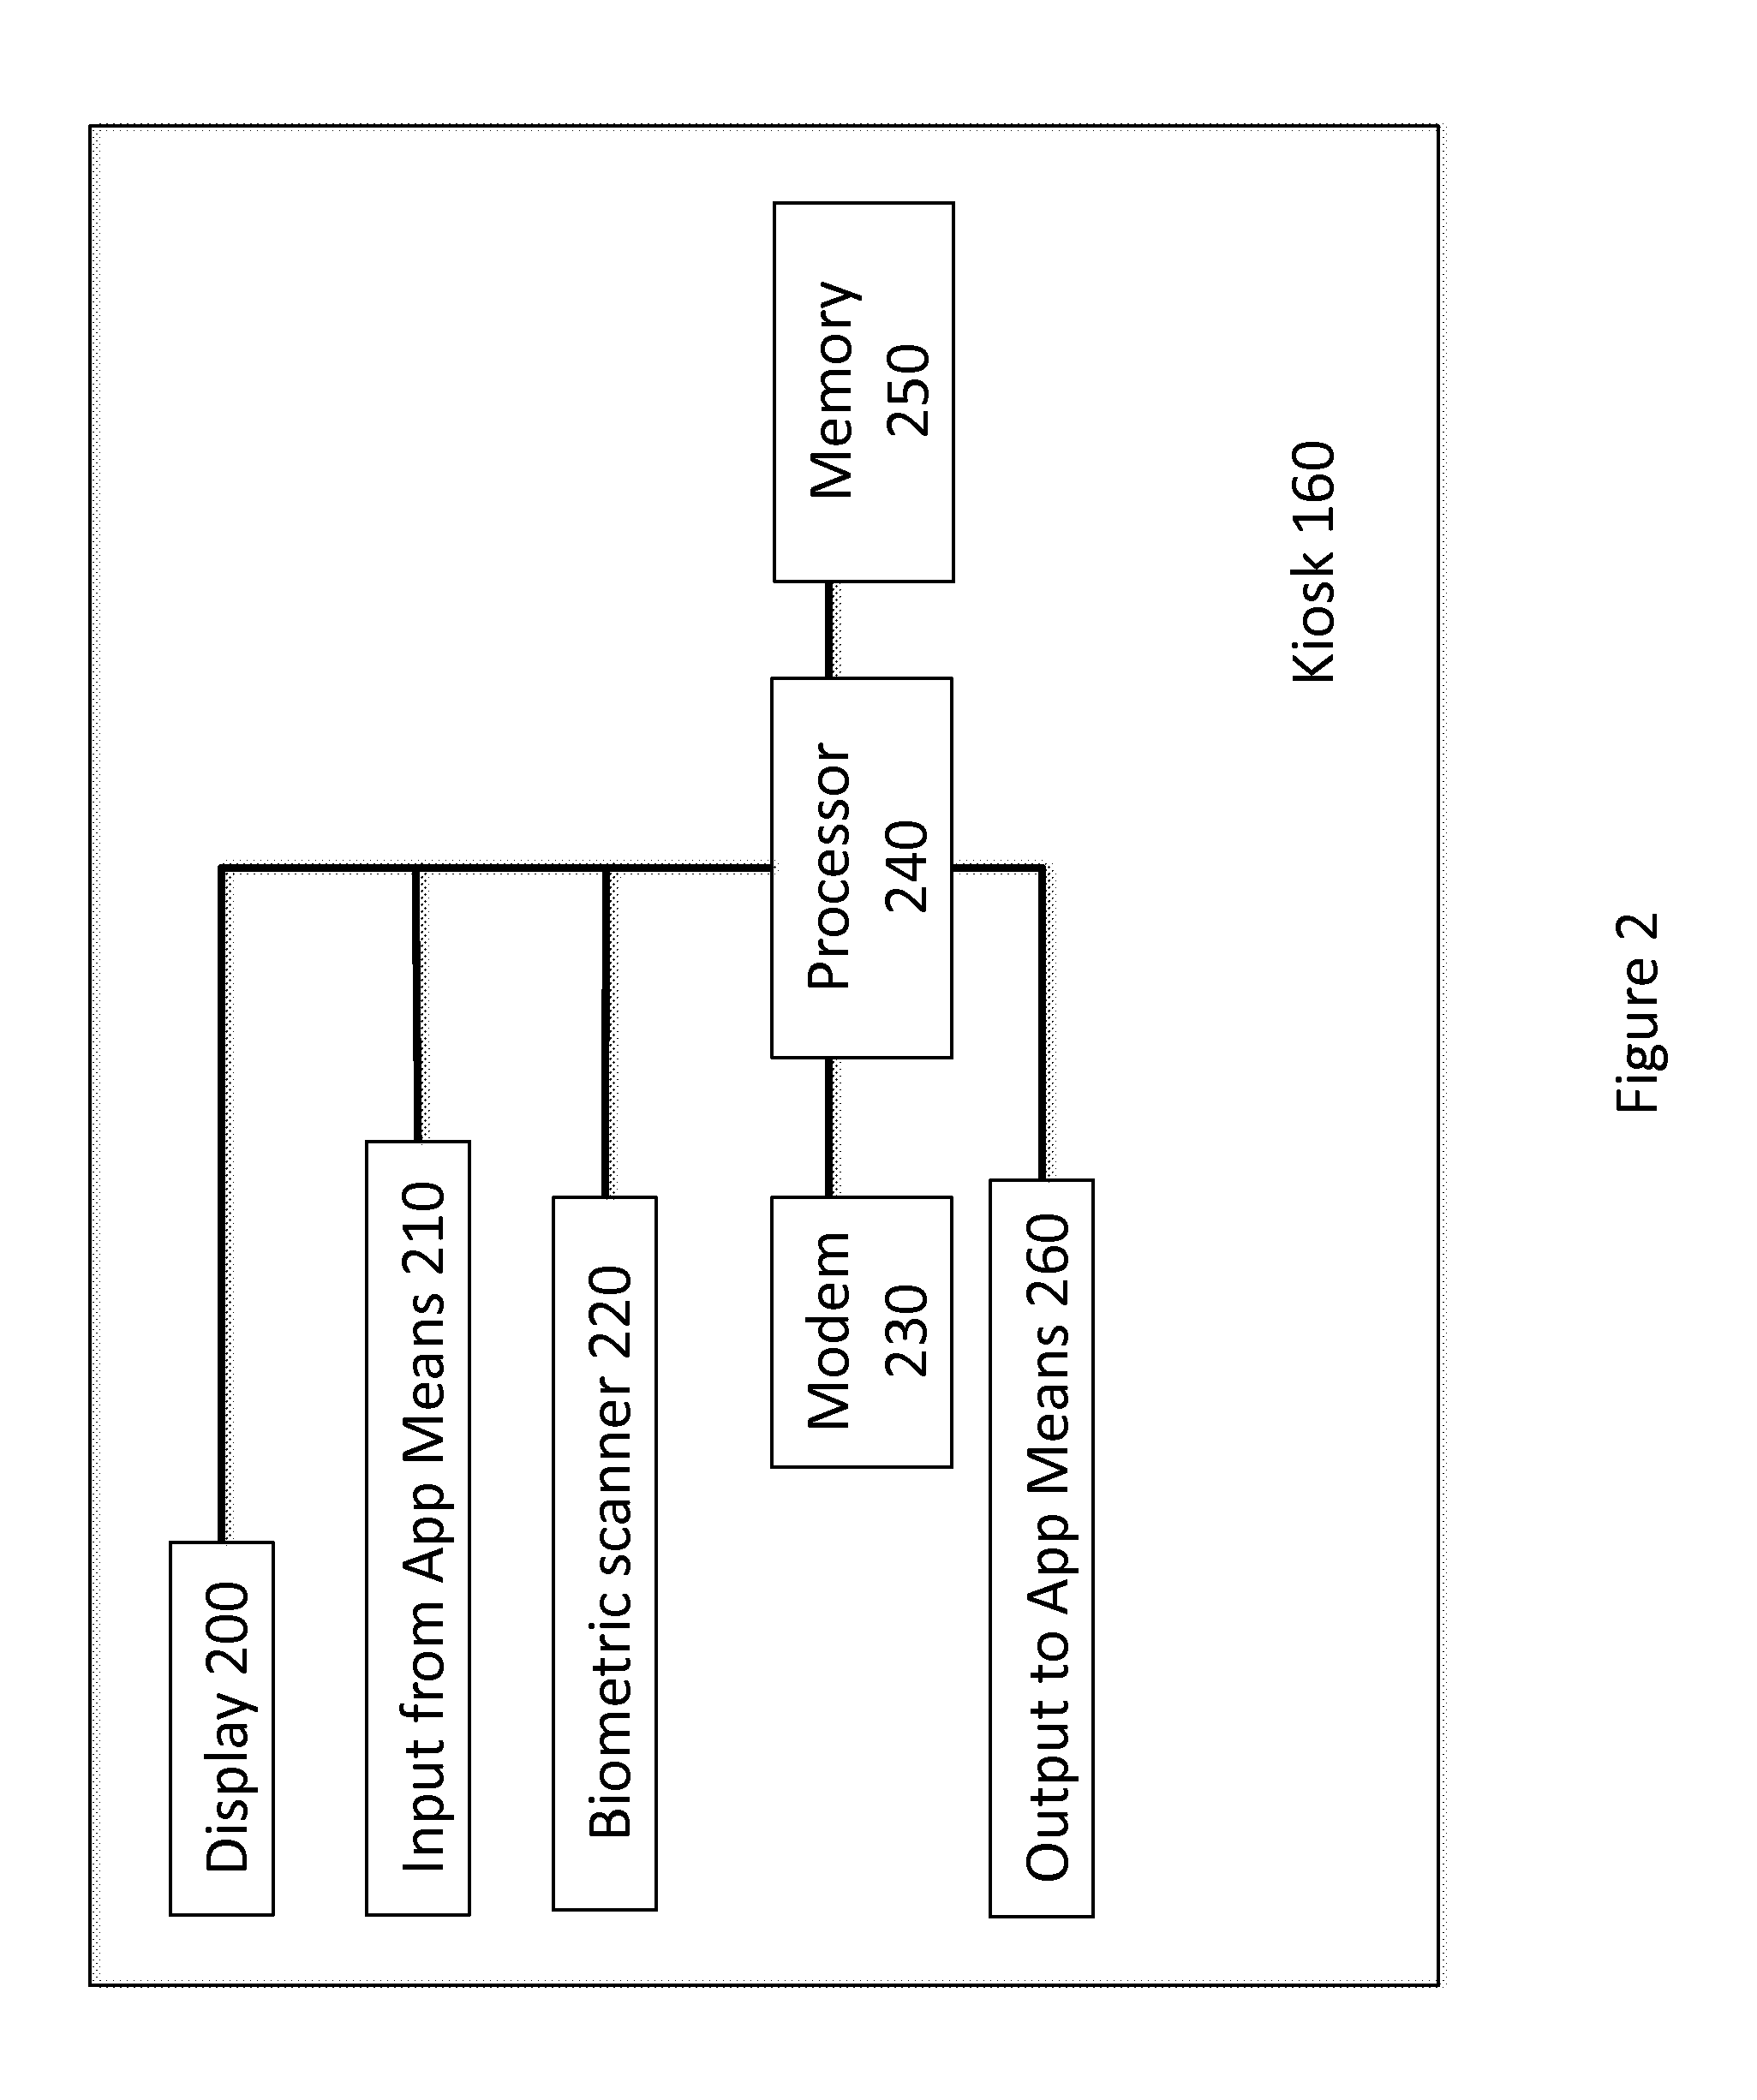 System and method for verifying a travelers authorization to enter into a jurisdiction using a software application installed on a personal electronic device